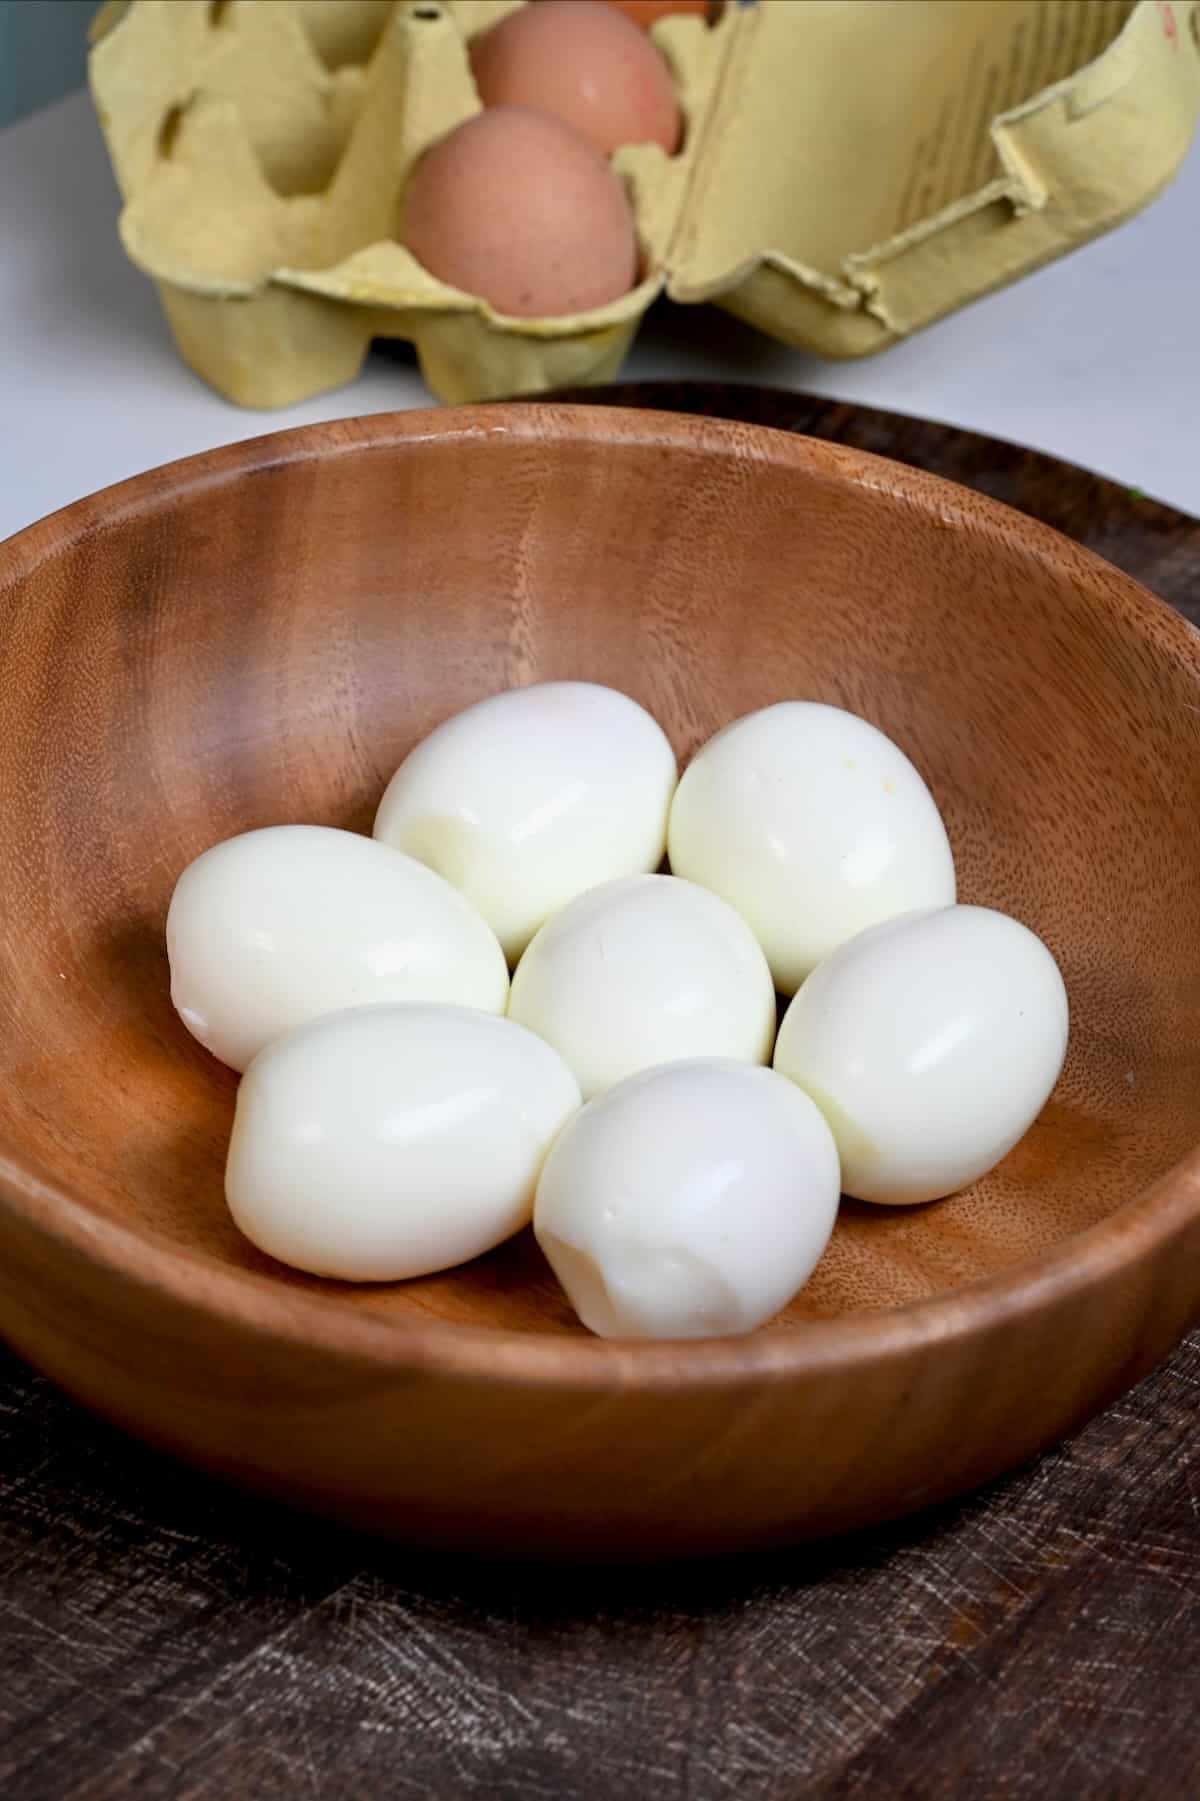 Seven peeled eggs cooked in air fryer